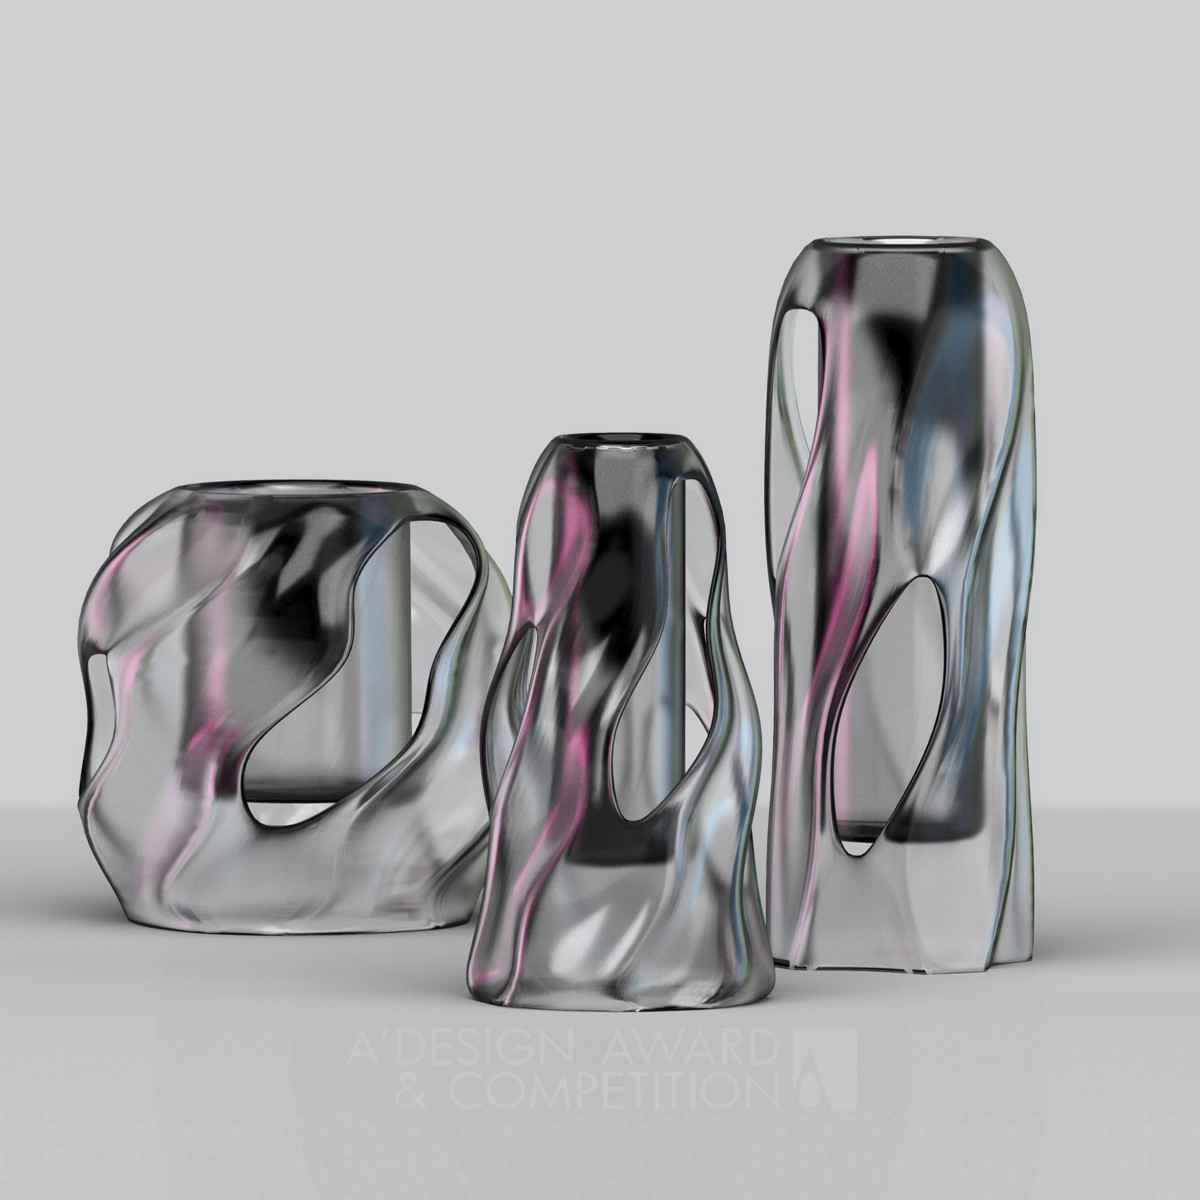 Wenkai Xue wins Silver at the prestigious A' 3D Printed Forms and Products Design Award with Mila 3D Printed Vase.